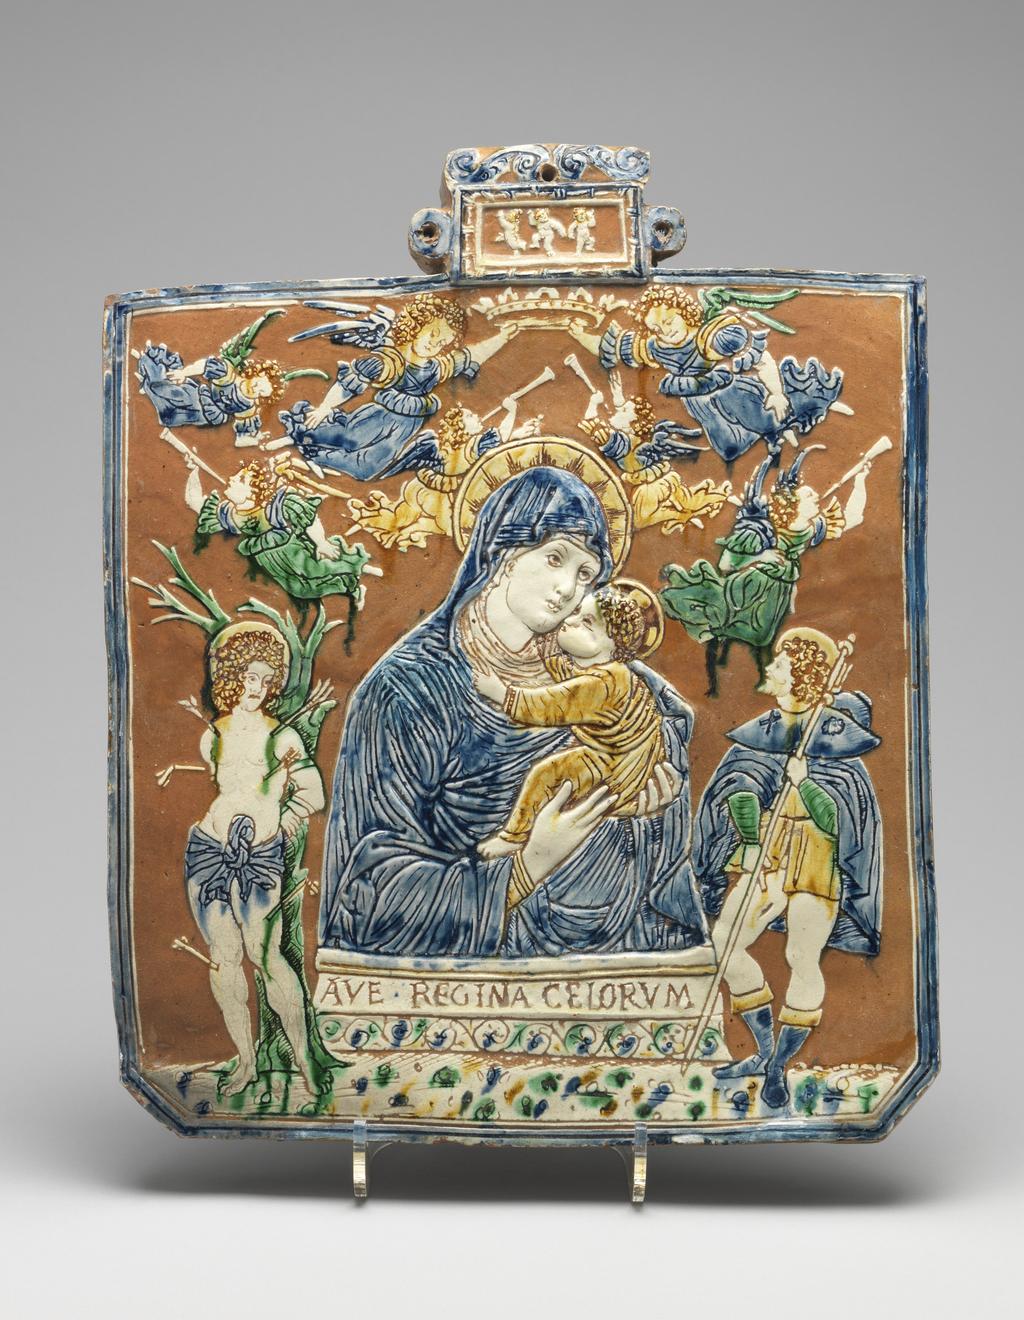 An image of Panel. The Virgin with Saints Roch and Sebastian. Unknown, perhaps The Veneto. Almost square with cut lower corners and a rectangular, scrolled protrusion at the top, with lateral rings and a hole for suspension. A half-length figure of the Virgin holding the Christ Child in her arms, with below, a pedestal inscribed 'AVE.REGINA CELORVM' (Hail Queen of the Heavens), and above, seven angels, of whom two hold a crown over her head and four blow trumpets. St Roch stands on the right hand and St Sebastian on the left. The small panel at the top contains three dancing putti. Pale red earthenware, moulded in very low relief in the middle, and coated with white slip which has been removed from the background. Incised decoration coloured blue, green and dark yellow under lead glaze. Height, whole, 33.7 cm, width, whole, 27.8 cm, depth, whole, 1.7 cm, circa 1500-1510. Renaissance.